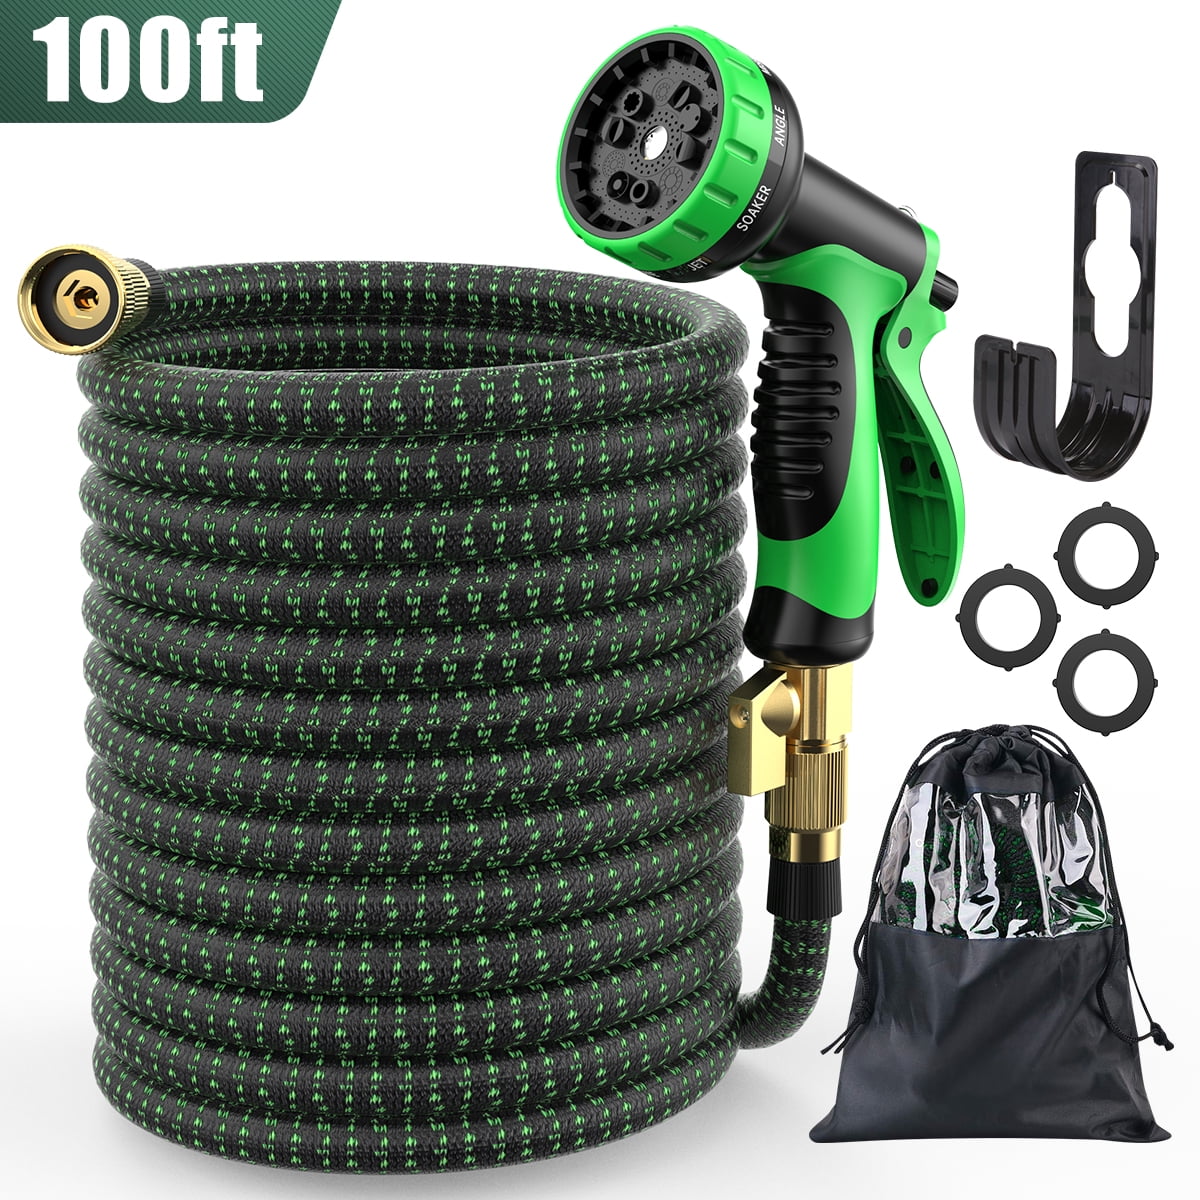 Durable No-Kink Flexible Hose 3750D Garden Water Hose 3/4 Inch Solid Brass Fittings and Strongest Triple Latex Core 50ft Expandable Garden Hose with 9 Function Nozzle 50FT 